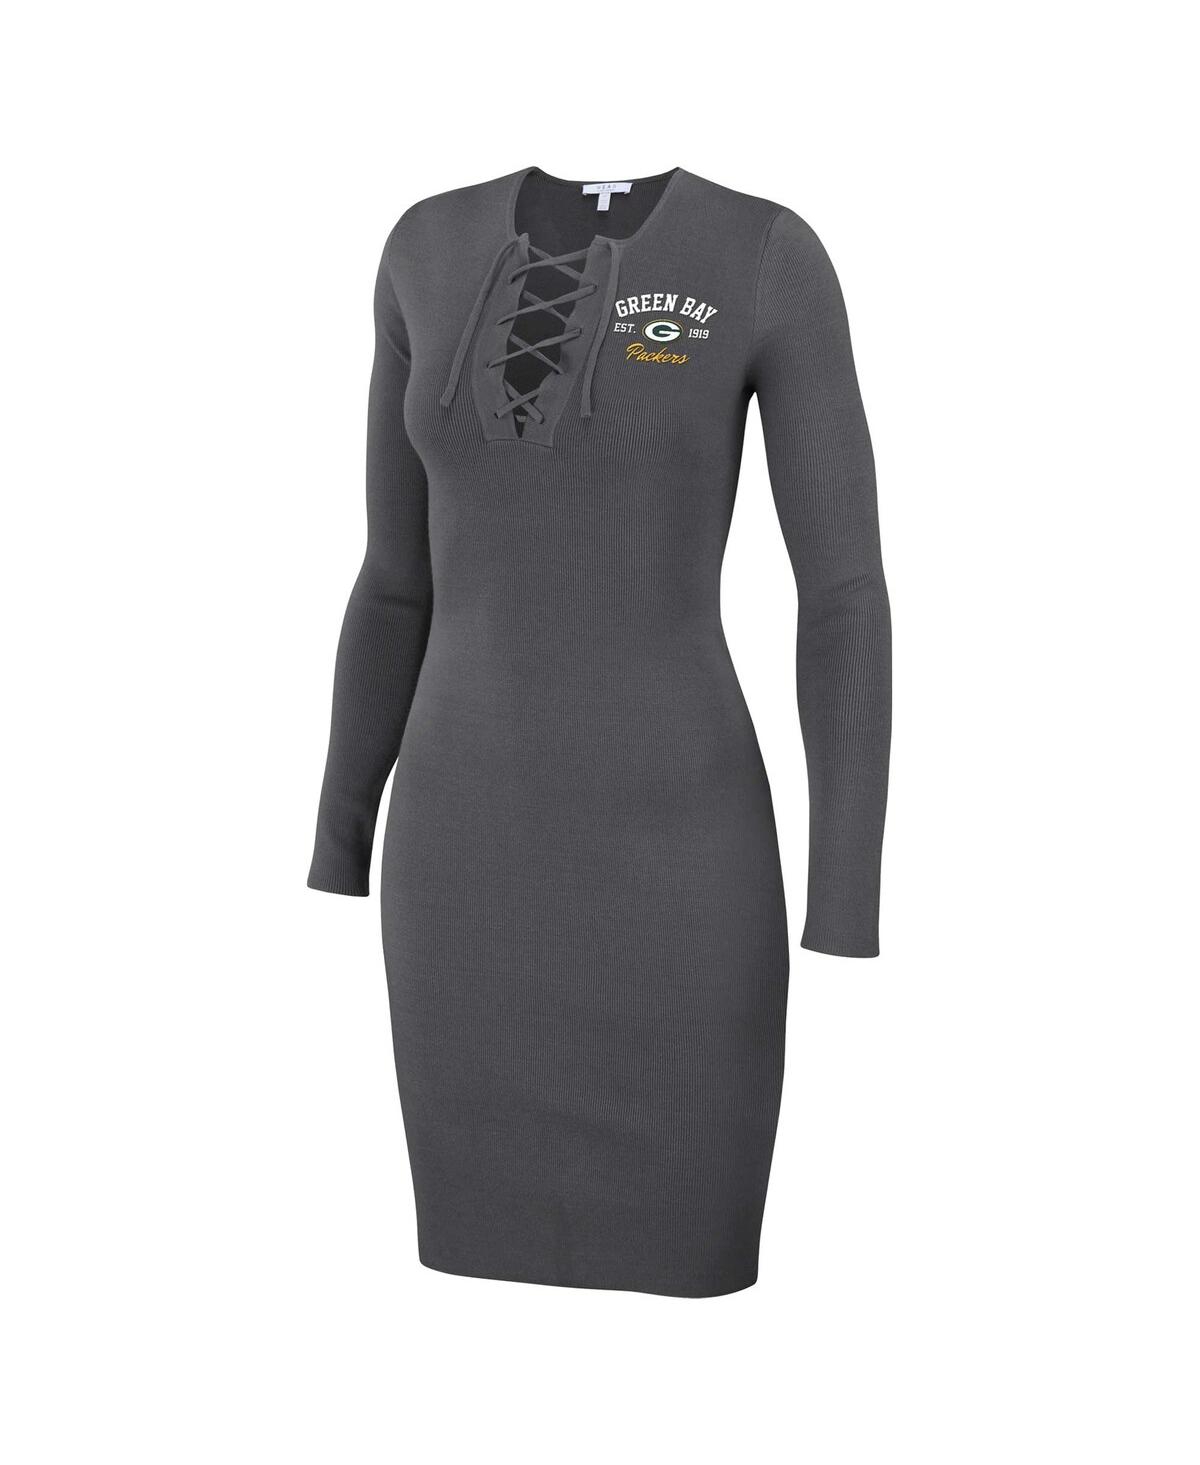 Shop Wear By Erin Andrews Women's  Charcoal Green Bay Packers Lace Up Long Sleeve Dress